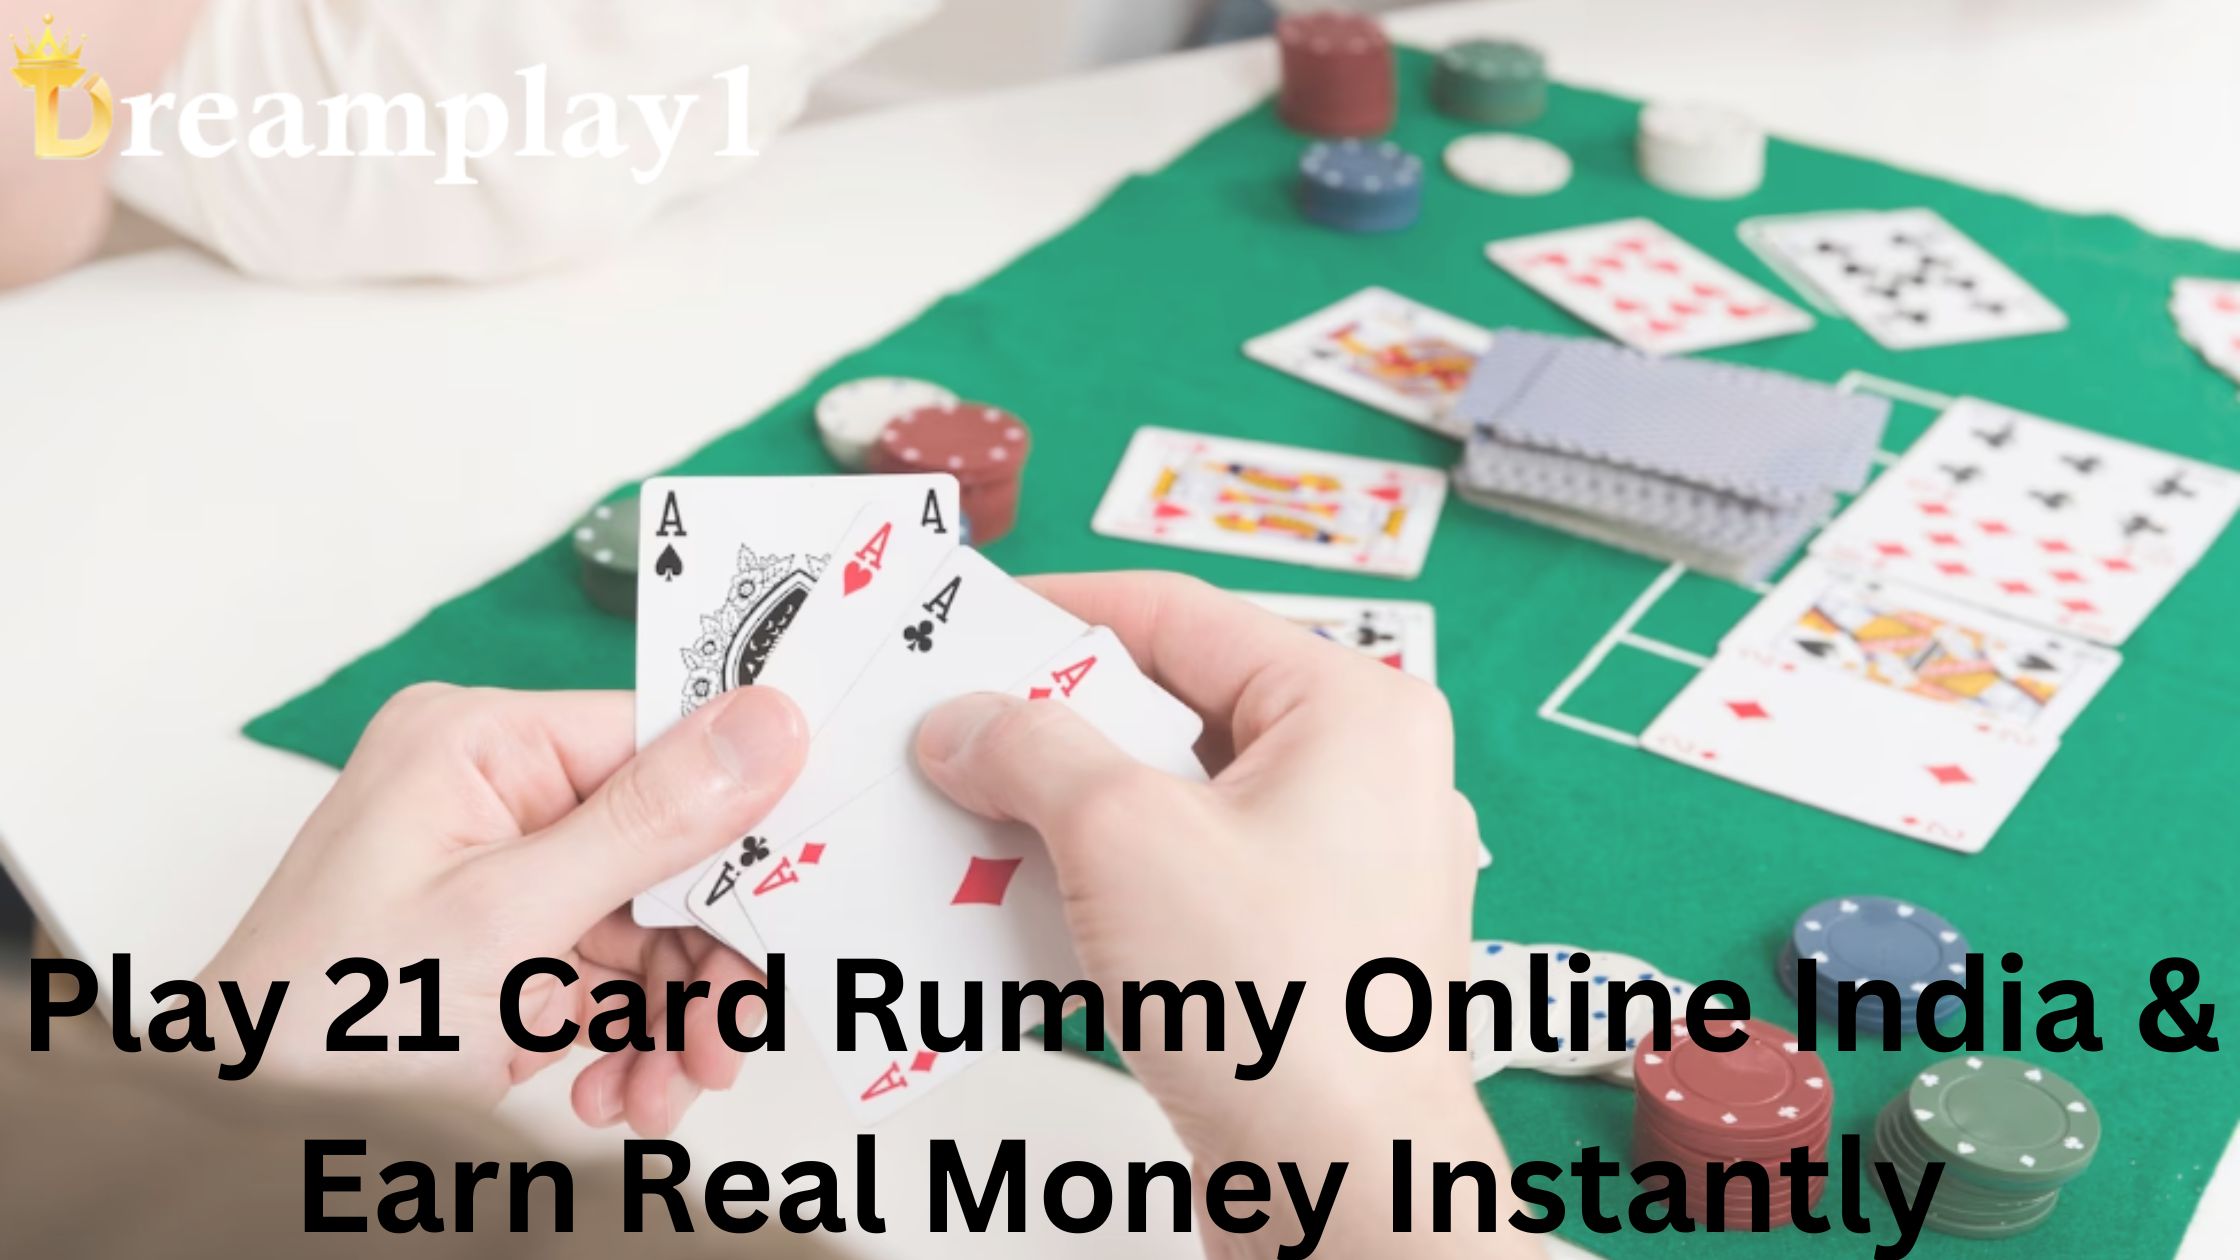 Play 21 Card Rummy Online India